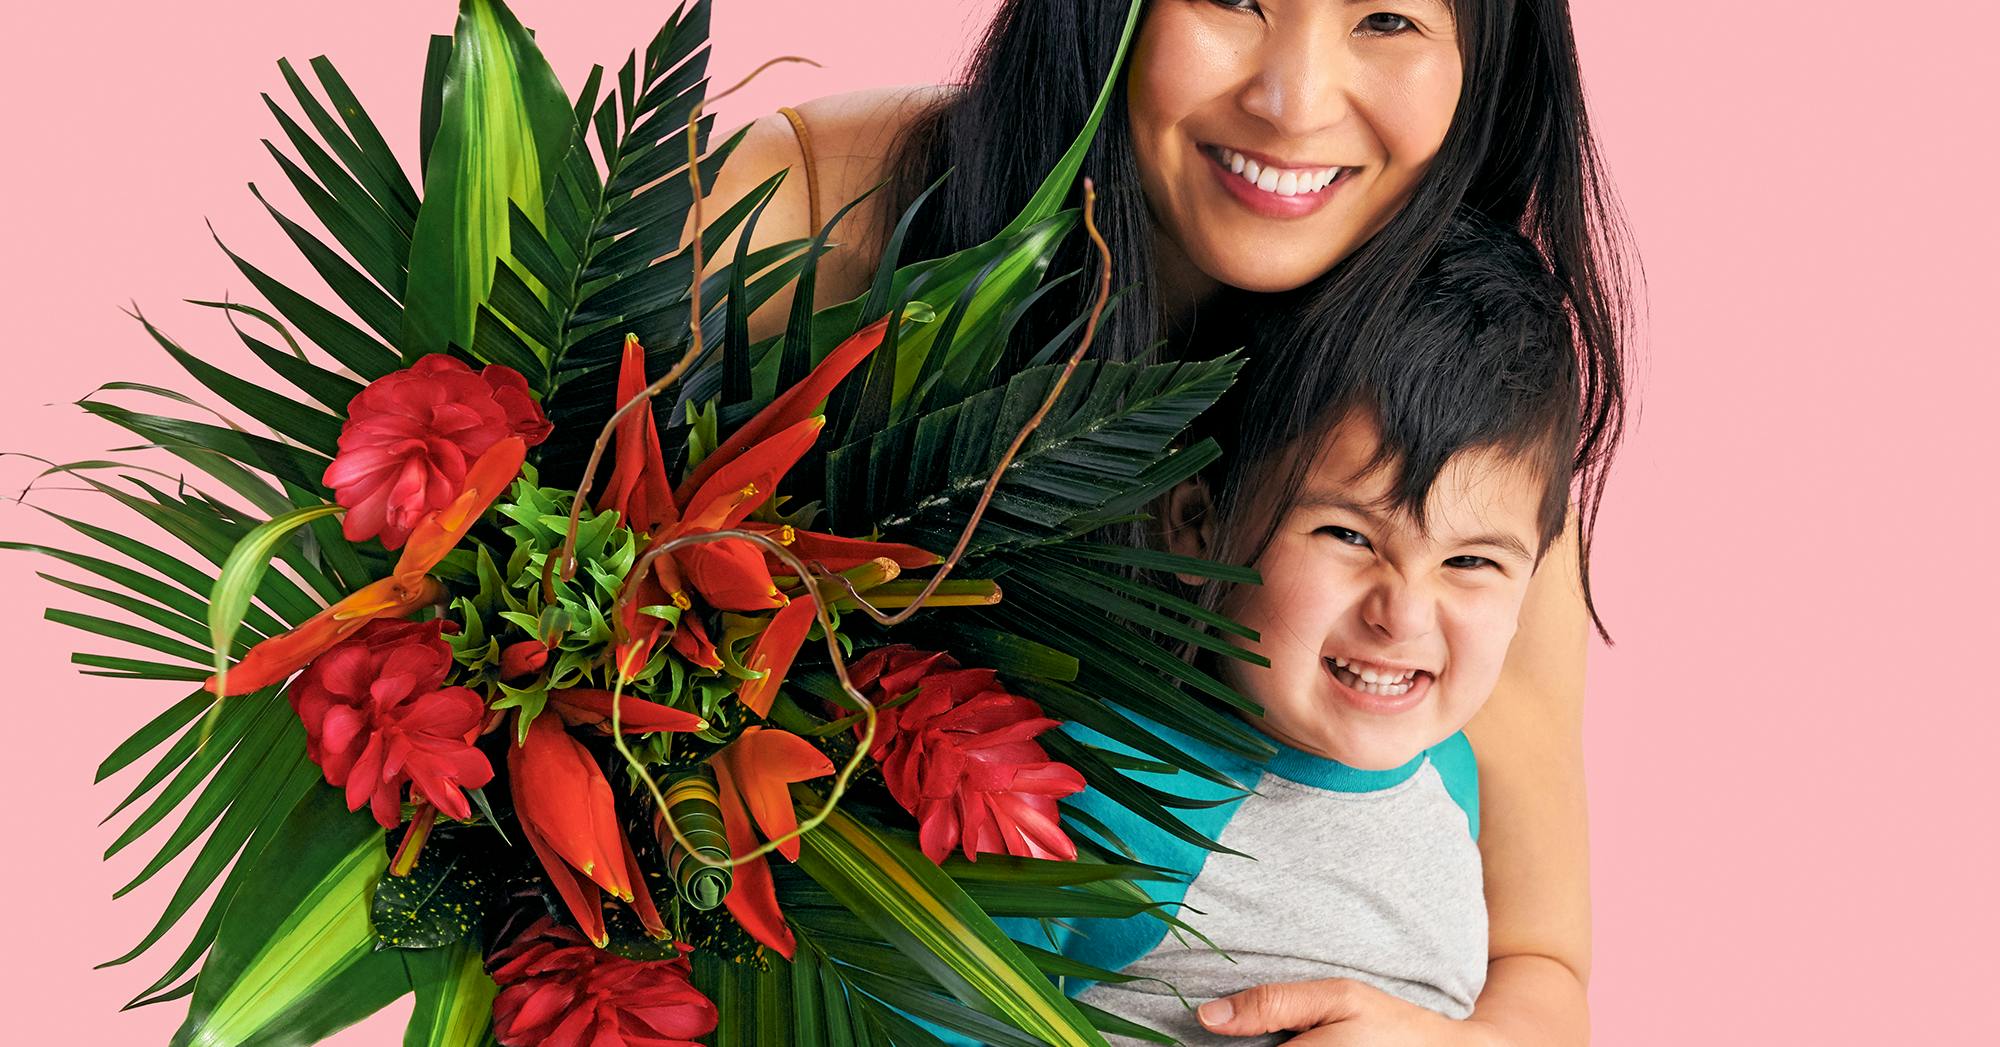 Up to 35% Off Mother's Day Flowers on Bouqs.com - The ...